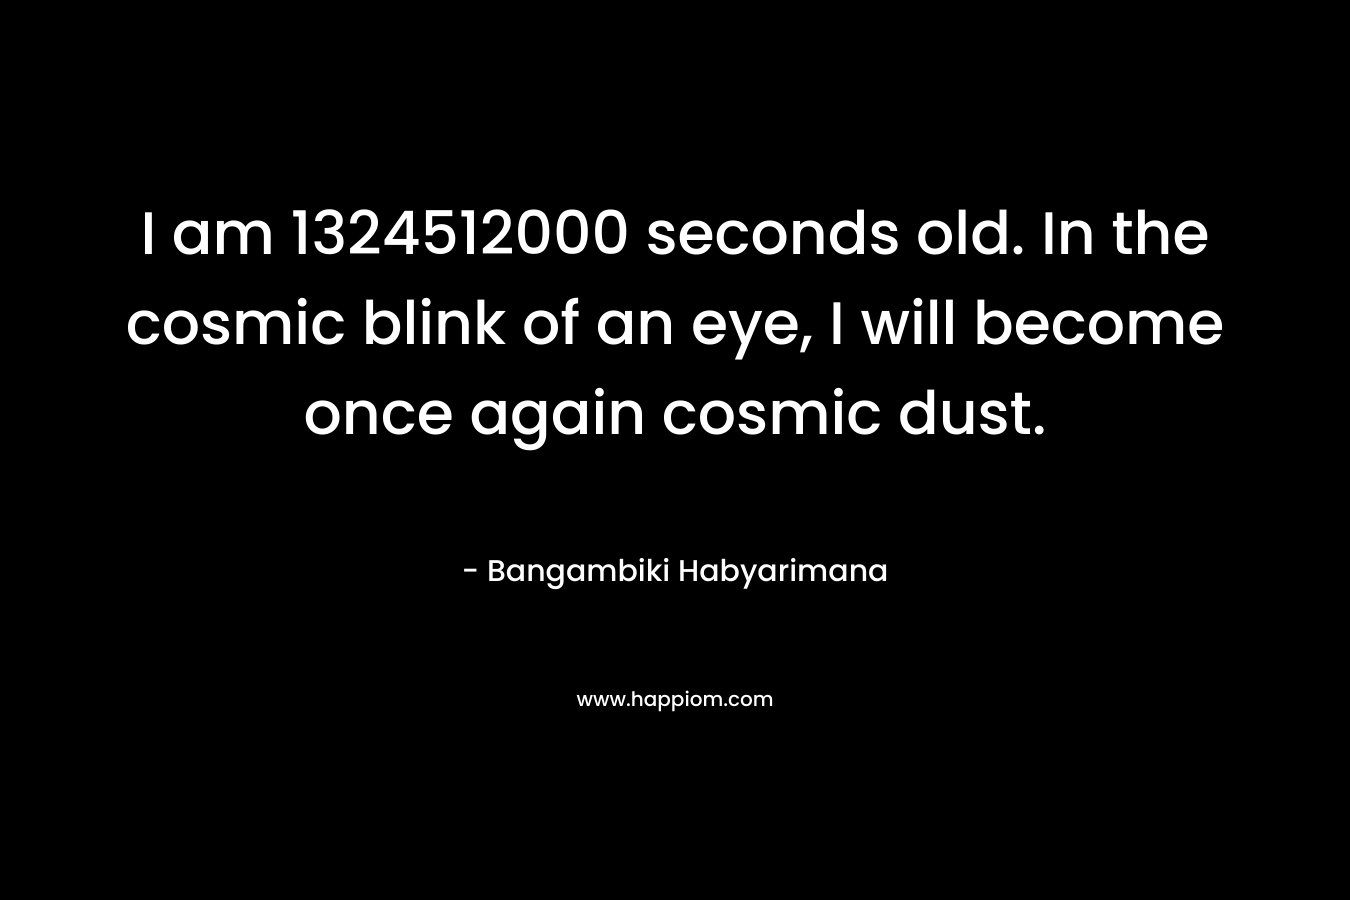 I am 1324512000 seconds old. In the cosmic blink of an eye, I will become once again cosmic dust. – Bangambiki Habyarimana